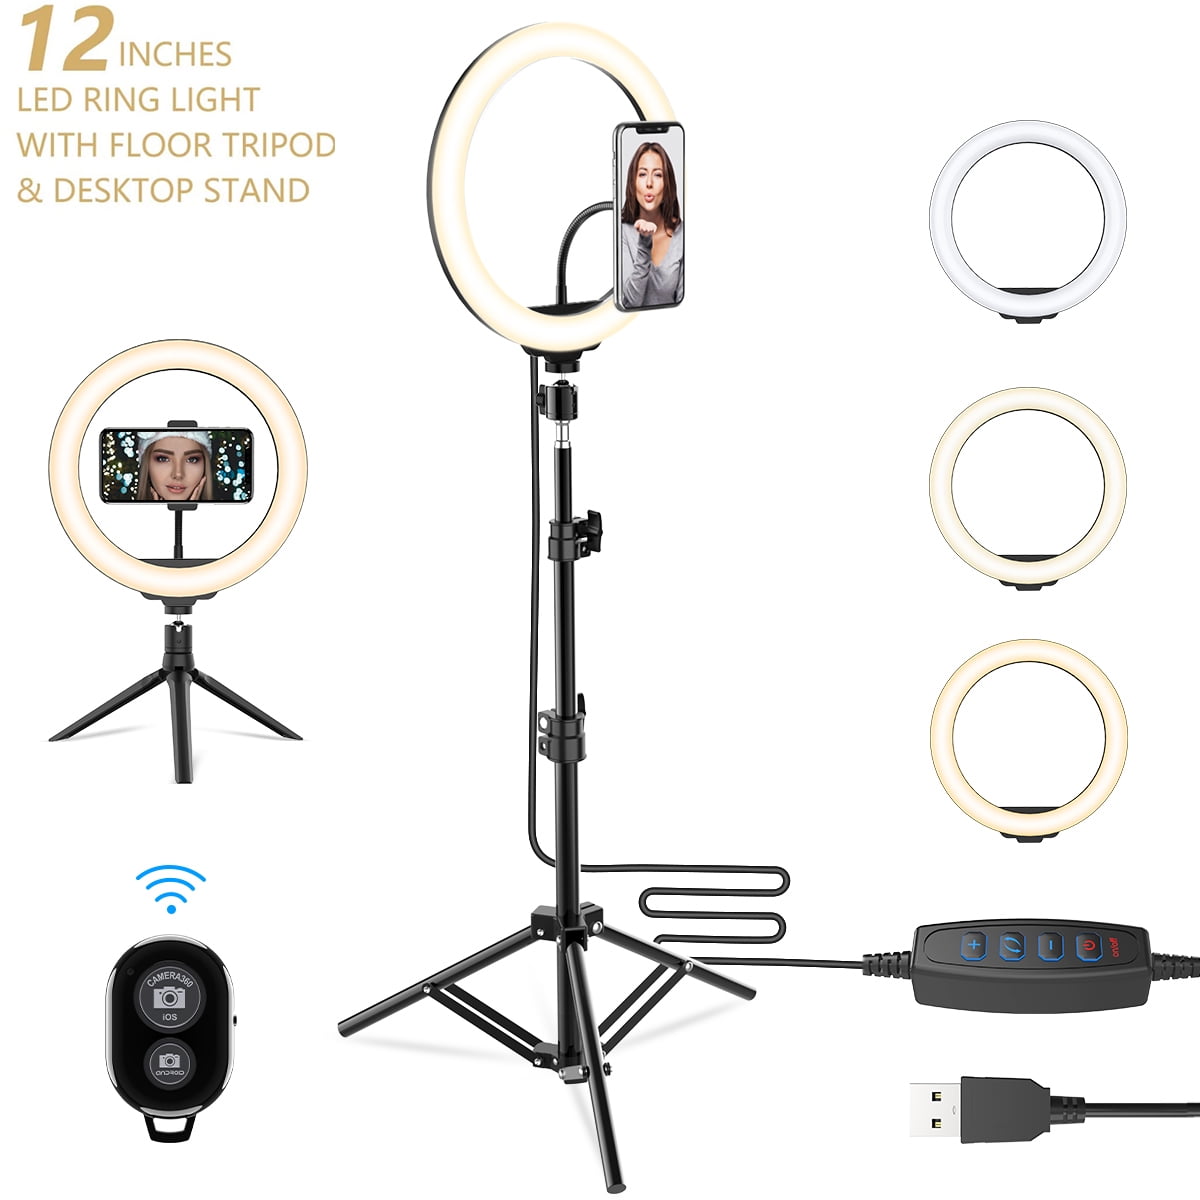 TikTok 10 Selfie Ring Light 26 Colors RGB LED Ring Light with Tripod Stand & Cell Phone Holder for Live Stream Video Recording Compatible with iPhone & Android Phone YouTube Photography Makeup 